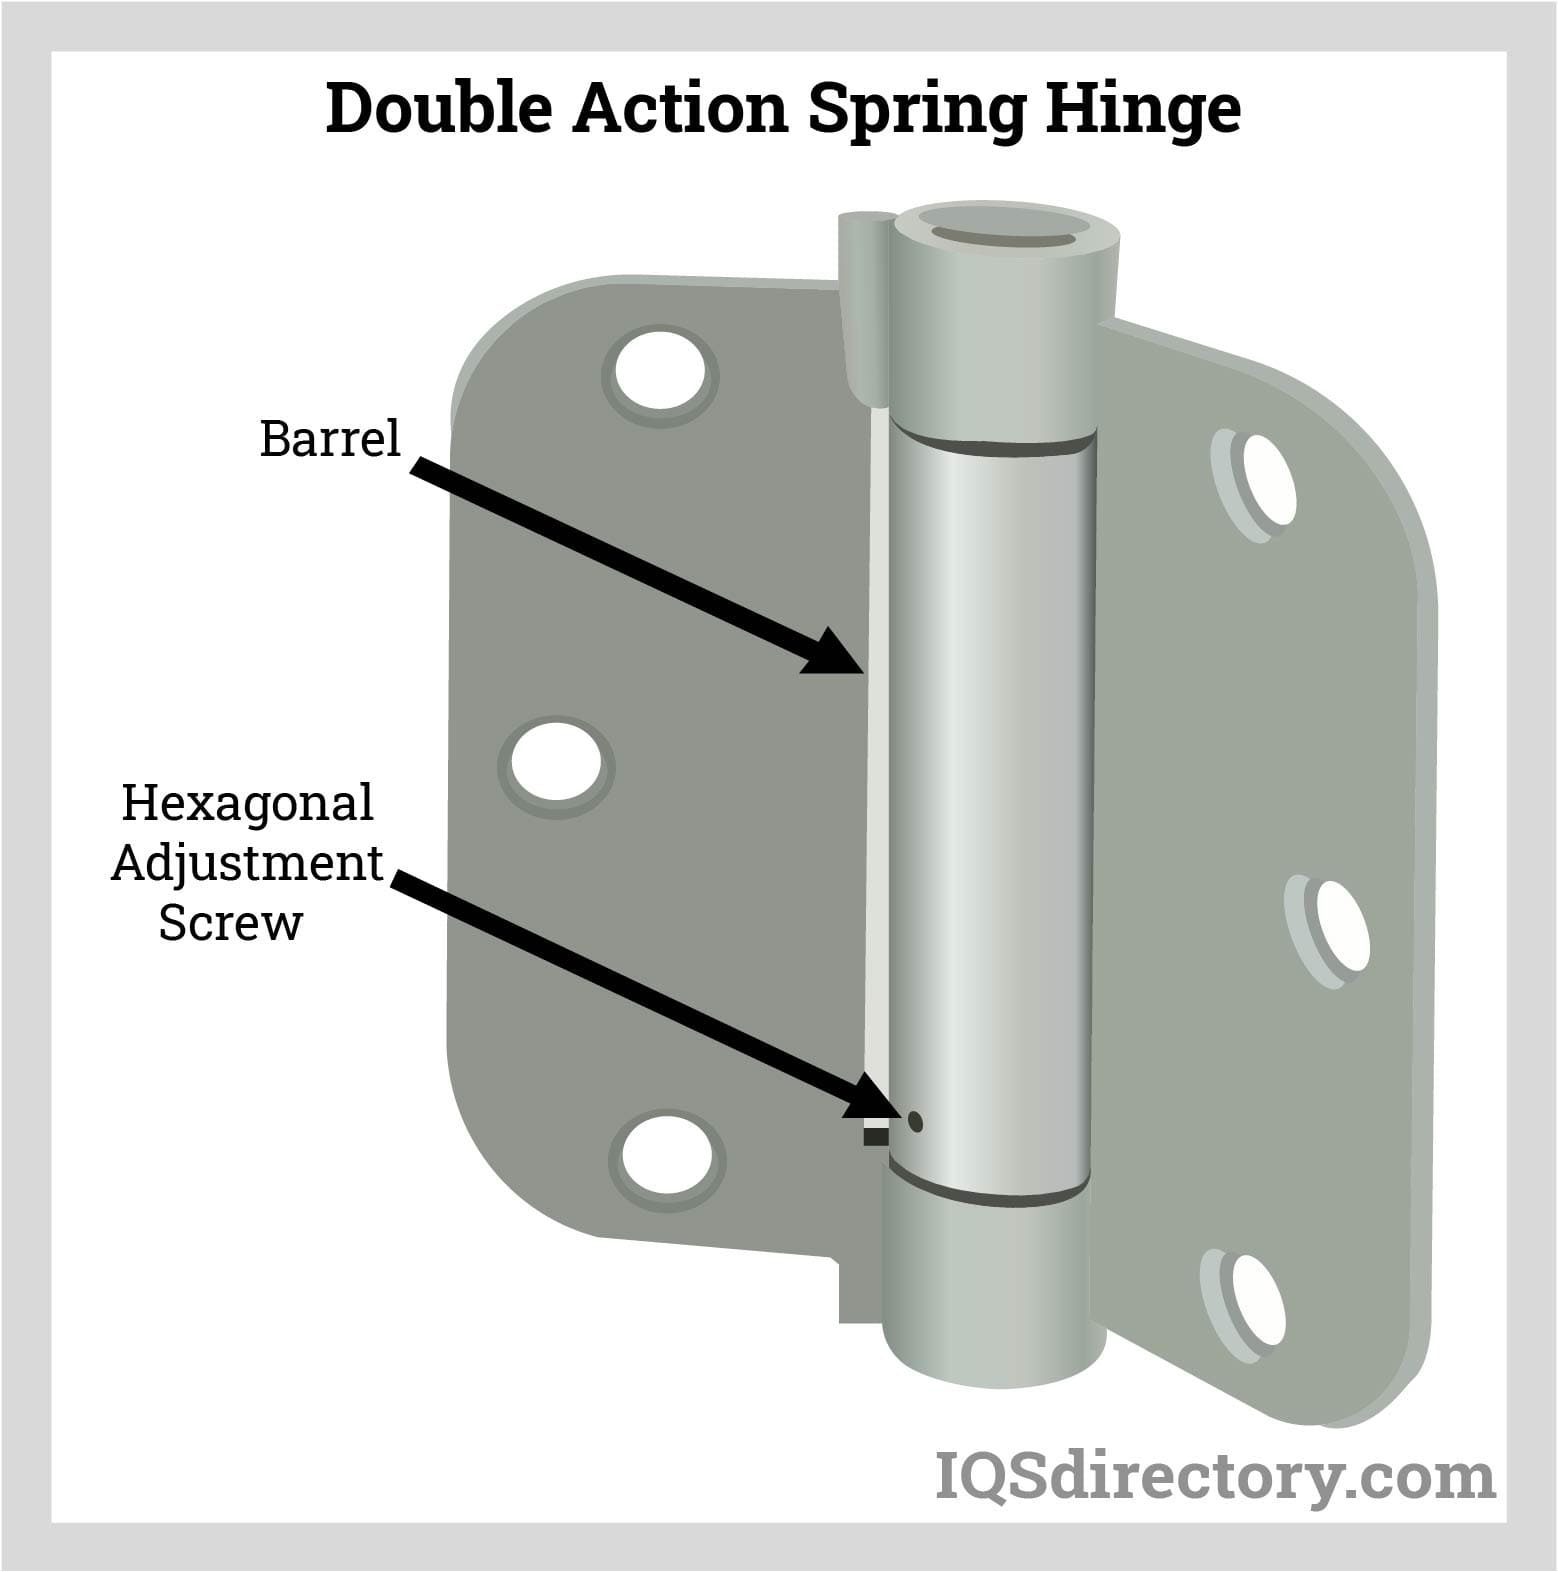 Barrel and Hexagonal Screw for a Spring Hinge